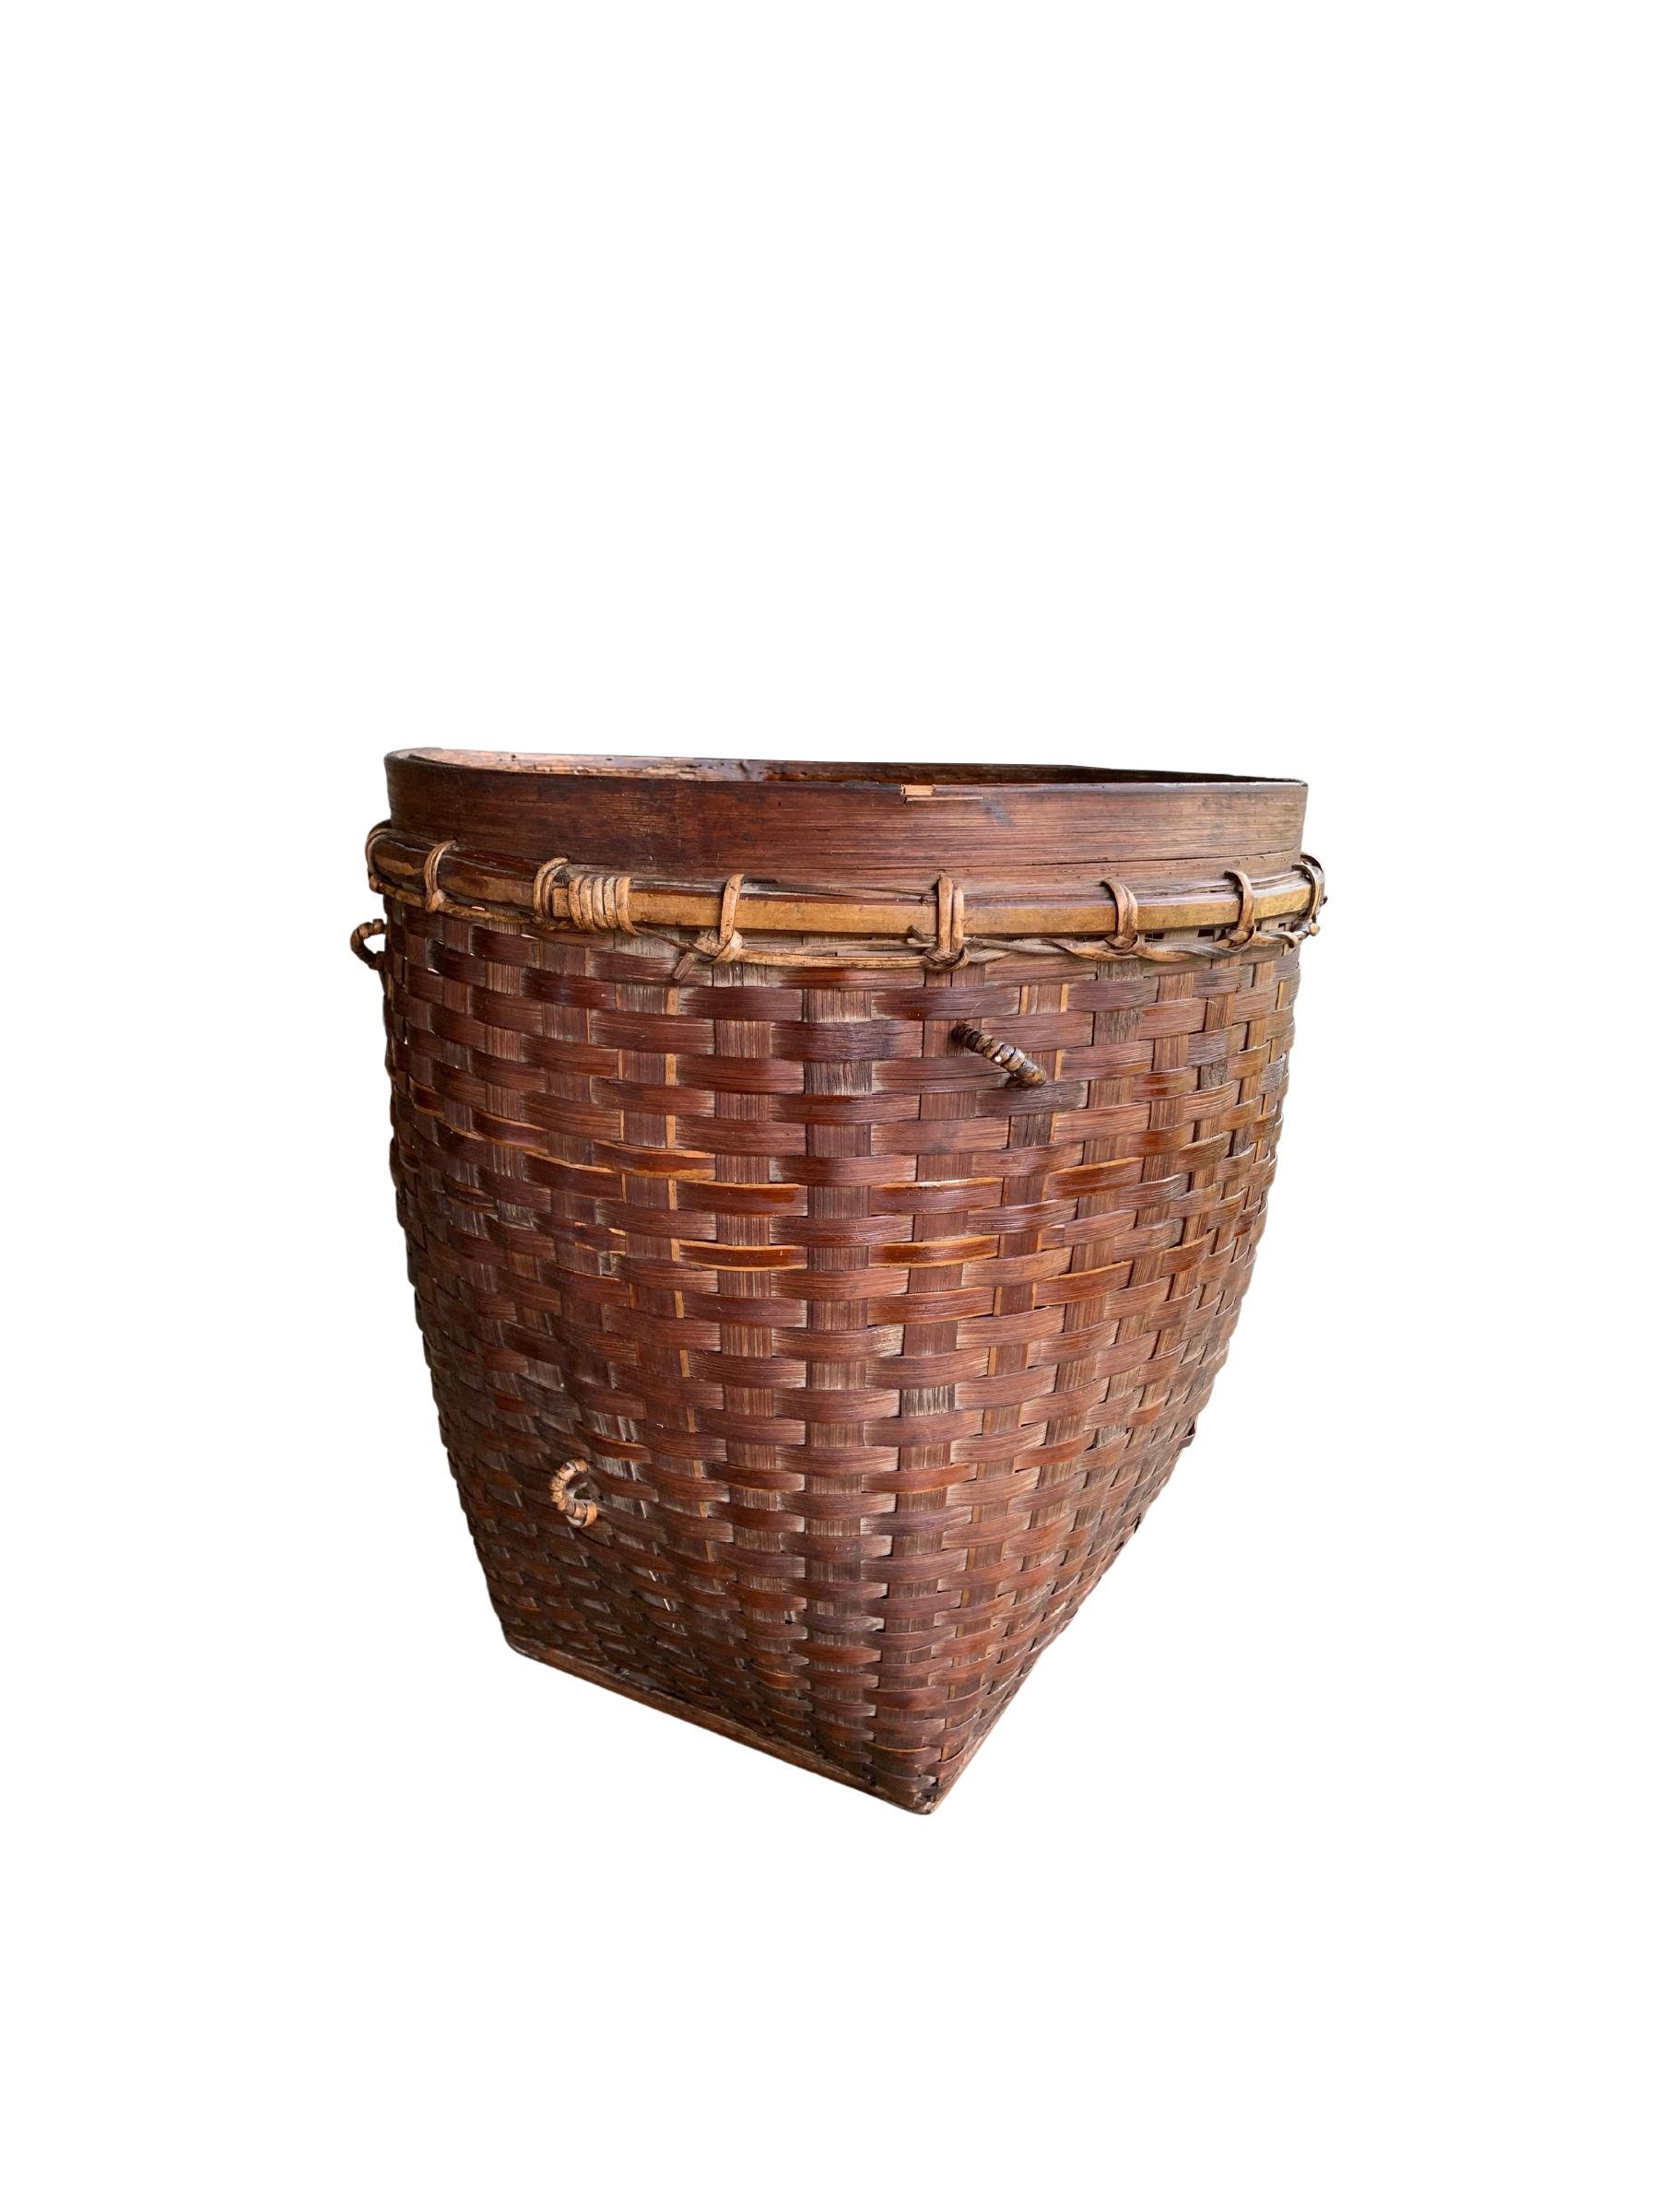 This mid-20th century hand-woven basket originates from the Dayak tribe of Borneo crafted with rattan fibres and an iron wood frame. These baskets were used to carry leaves, fruit, grain and wood and features wonderfully aged fibres and wood patina.